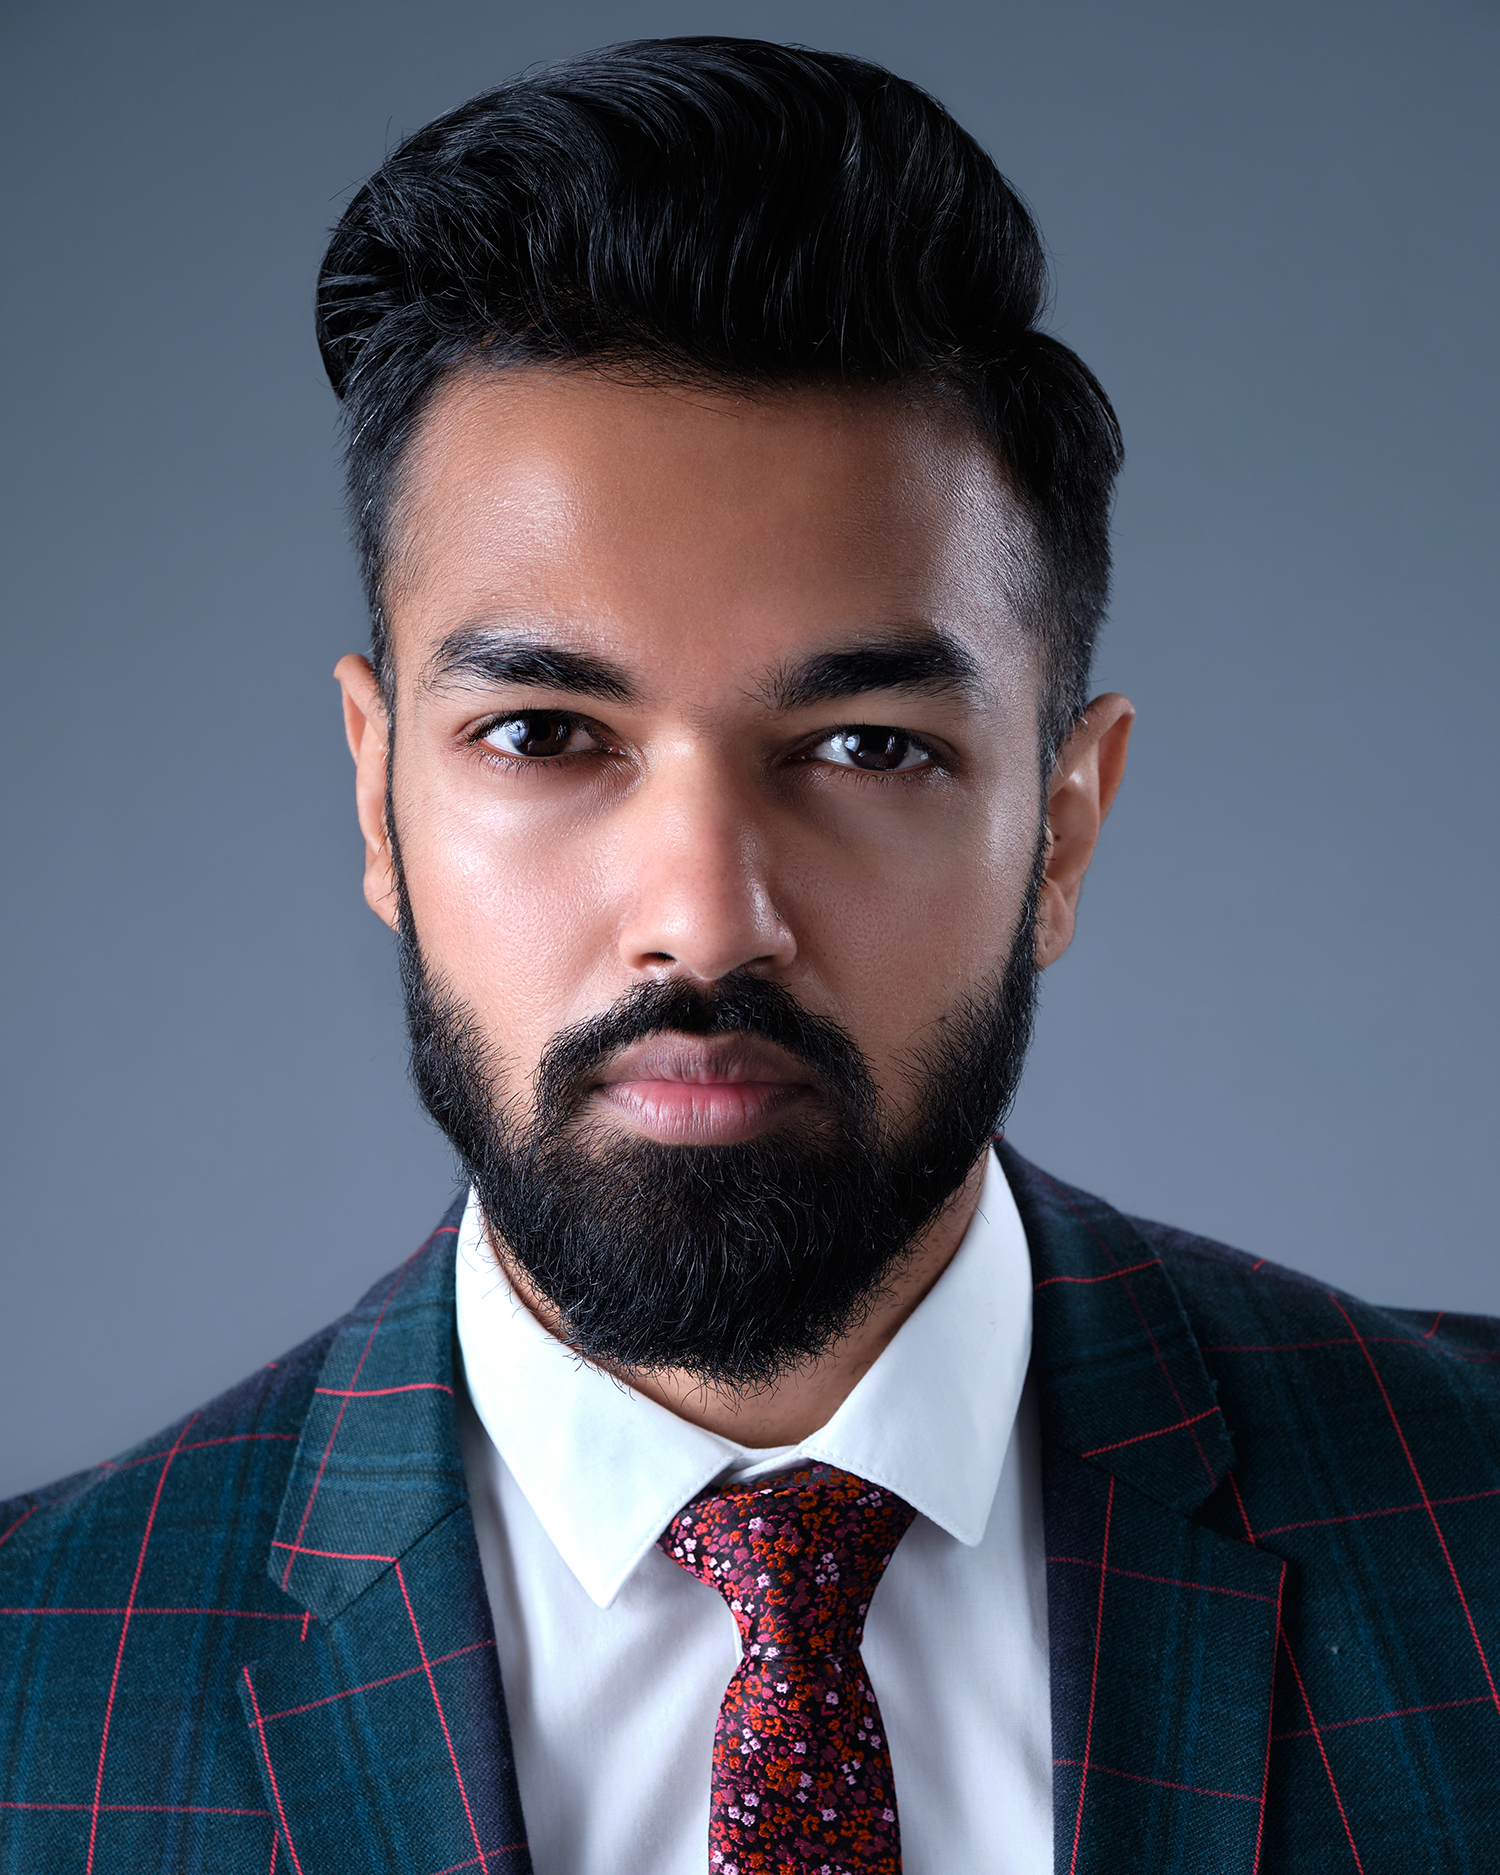 indian guy in suit